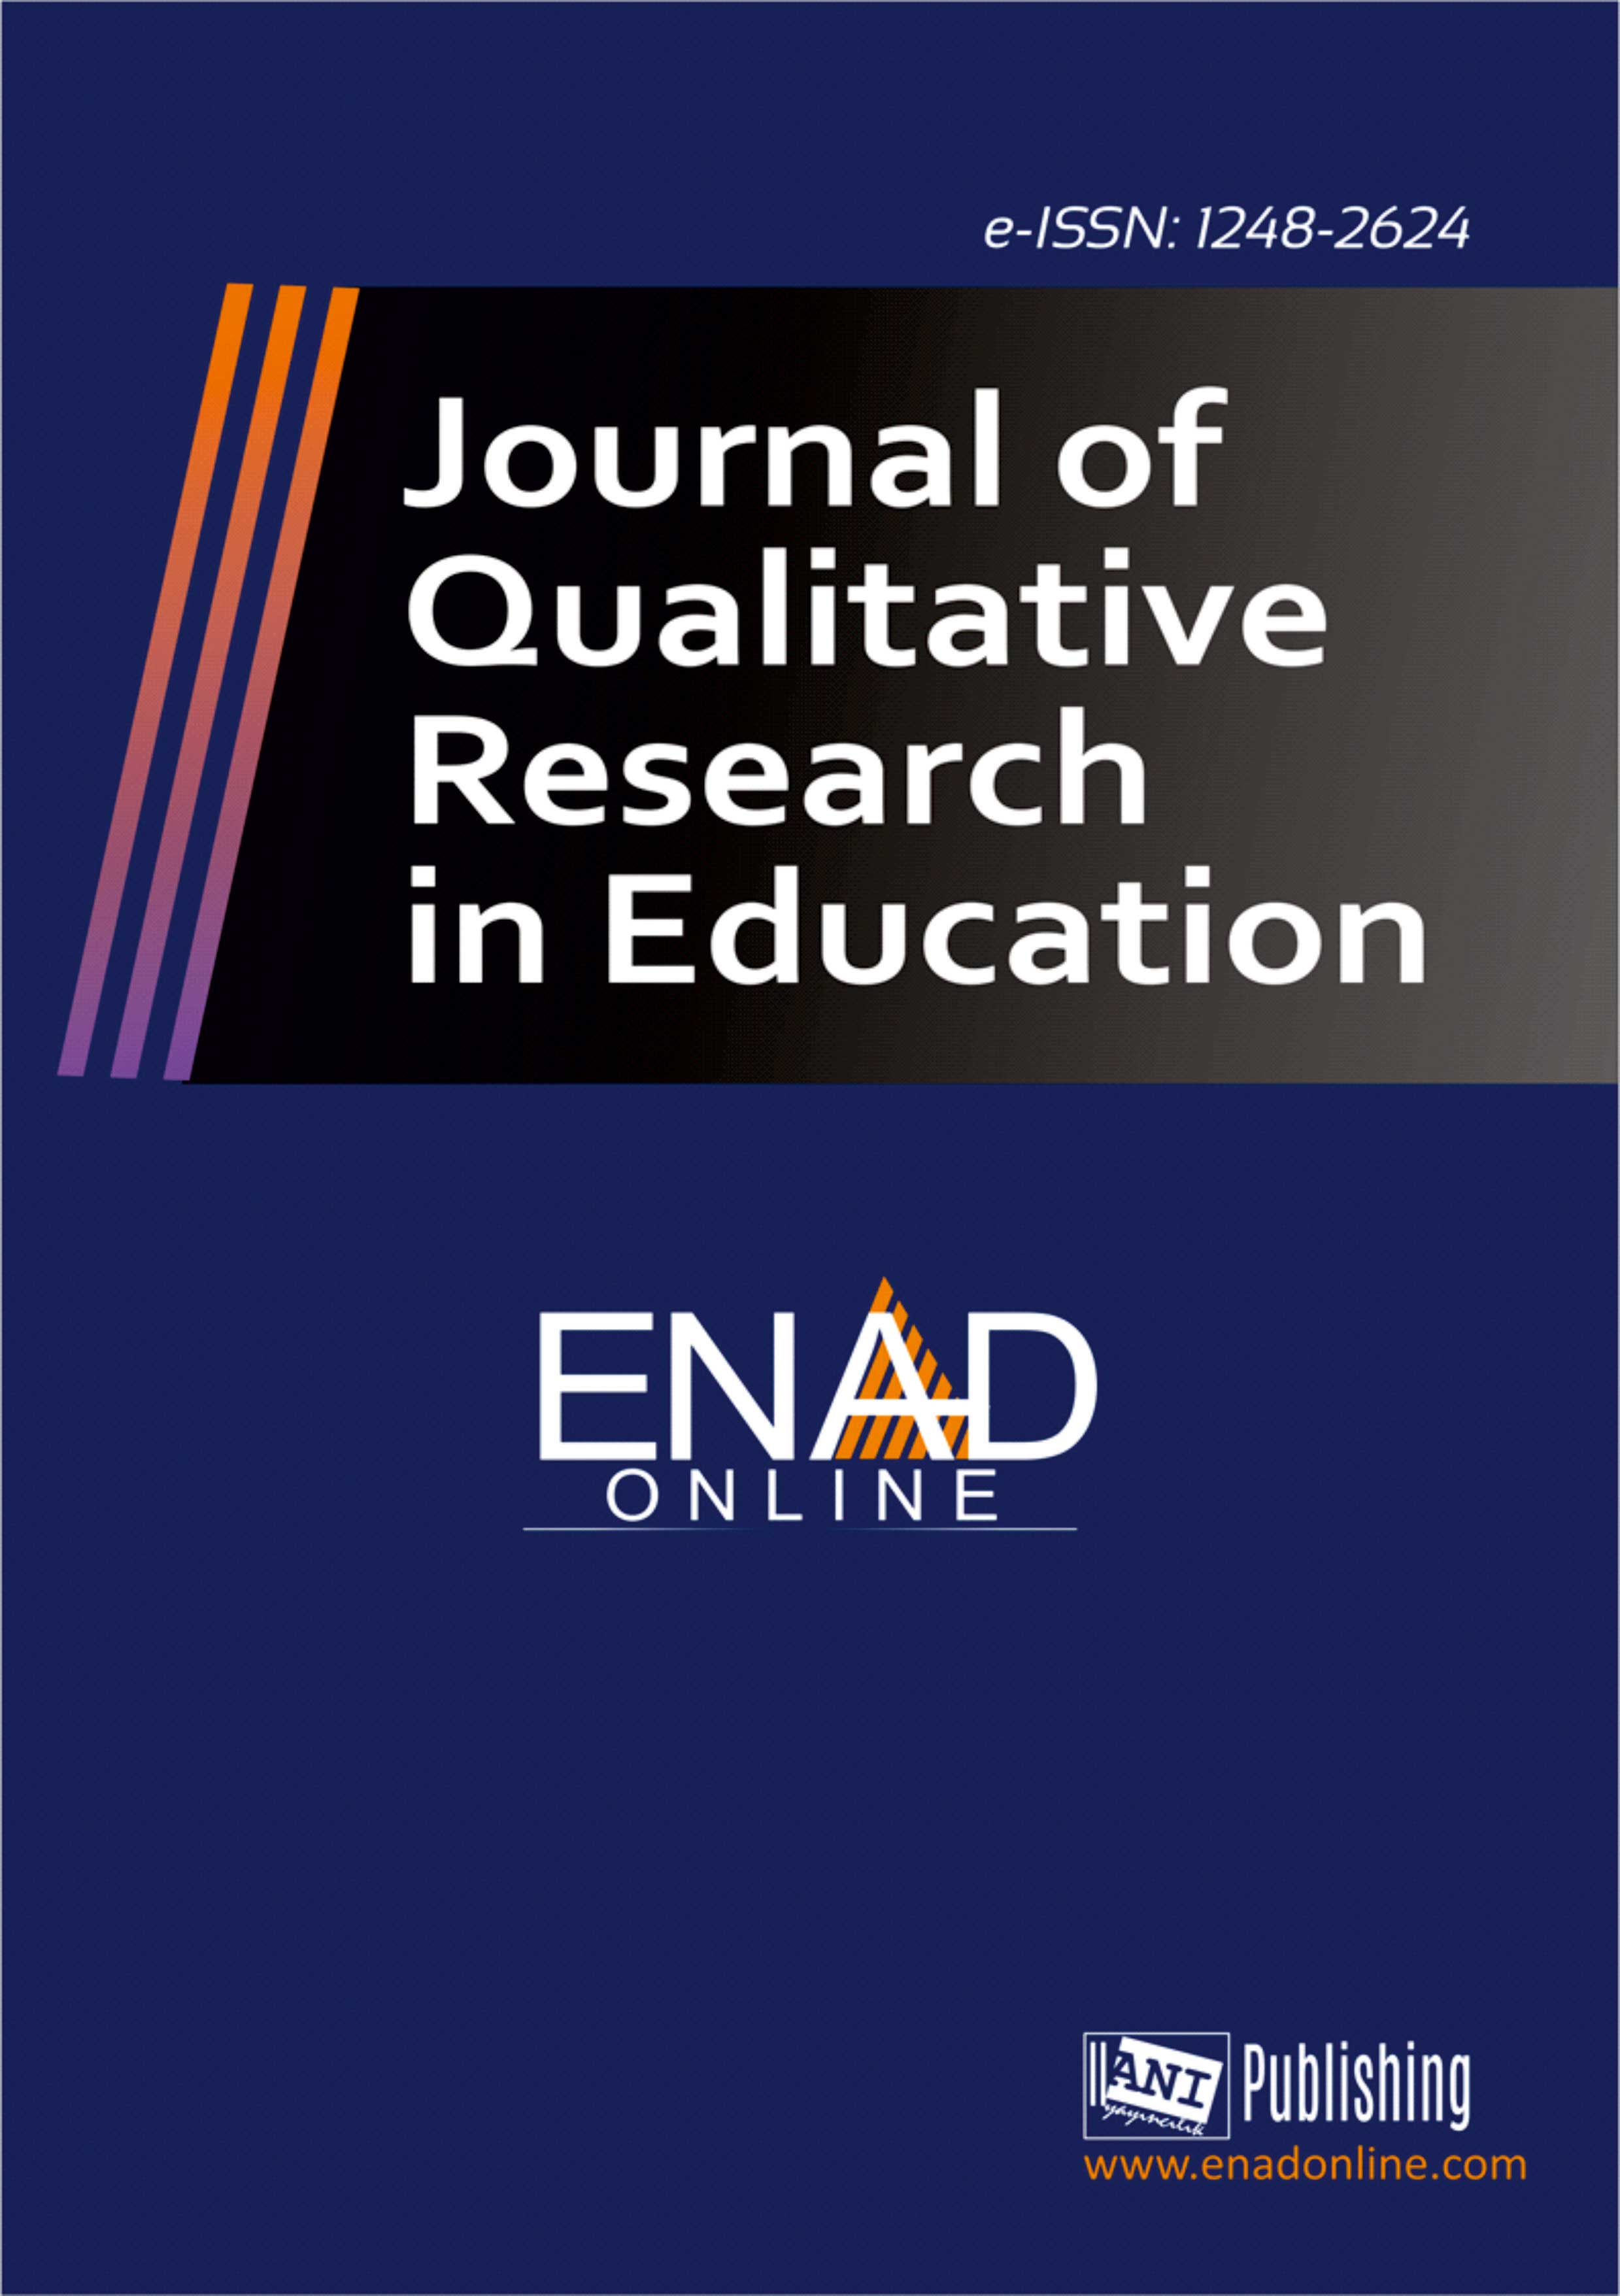 					View Vol. 3 Issue 1 (2015): Journal of Qualitative Research in Education
				